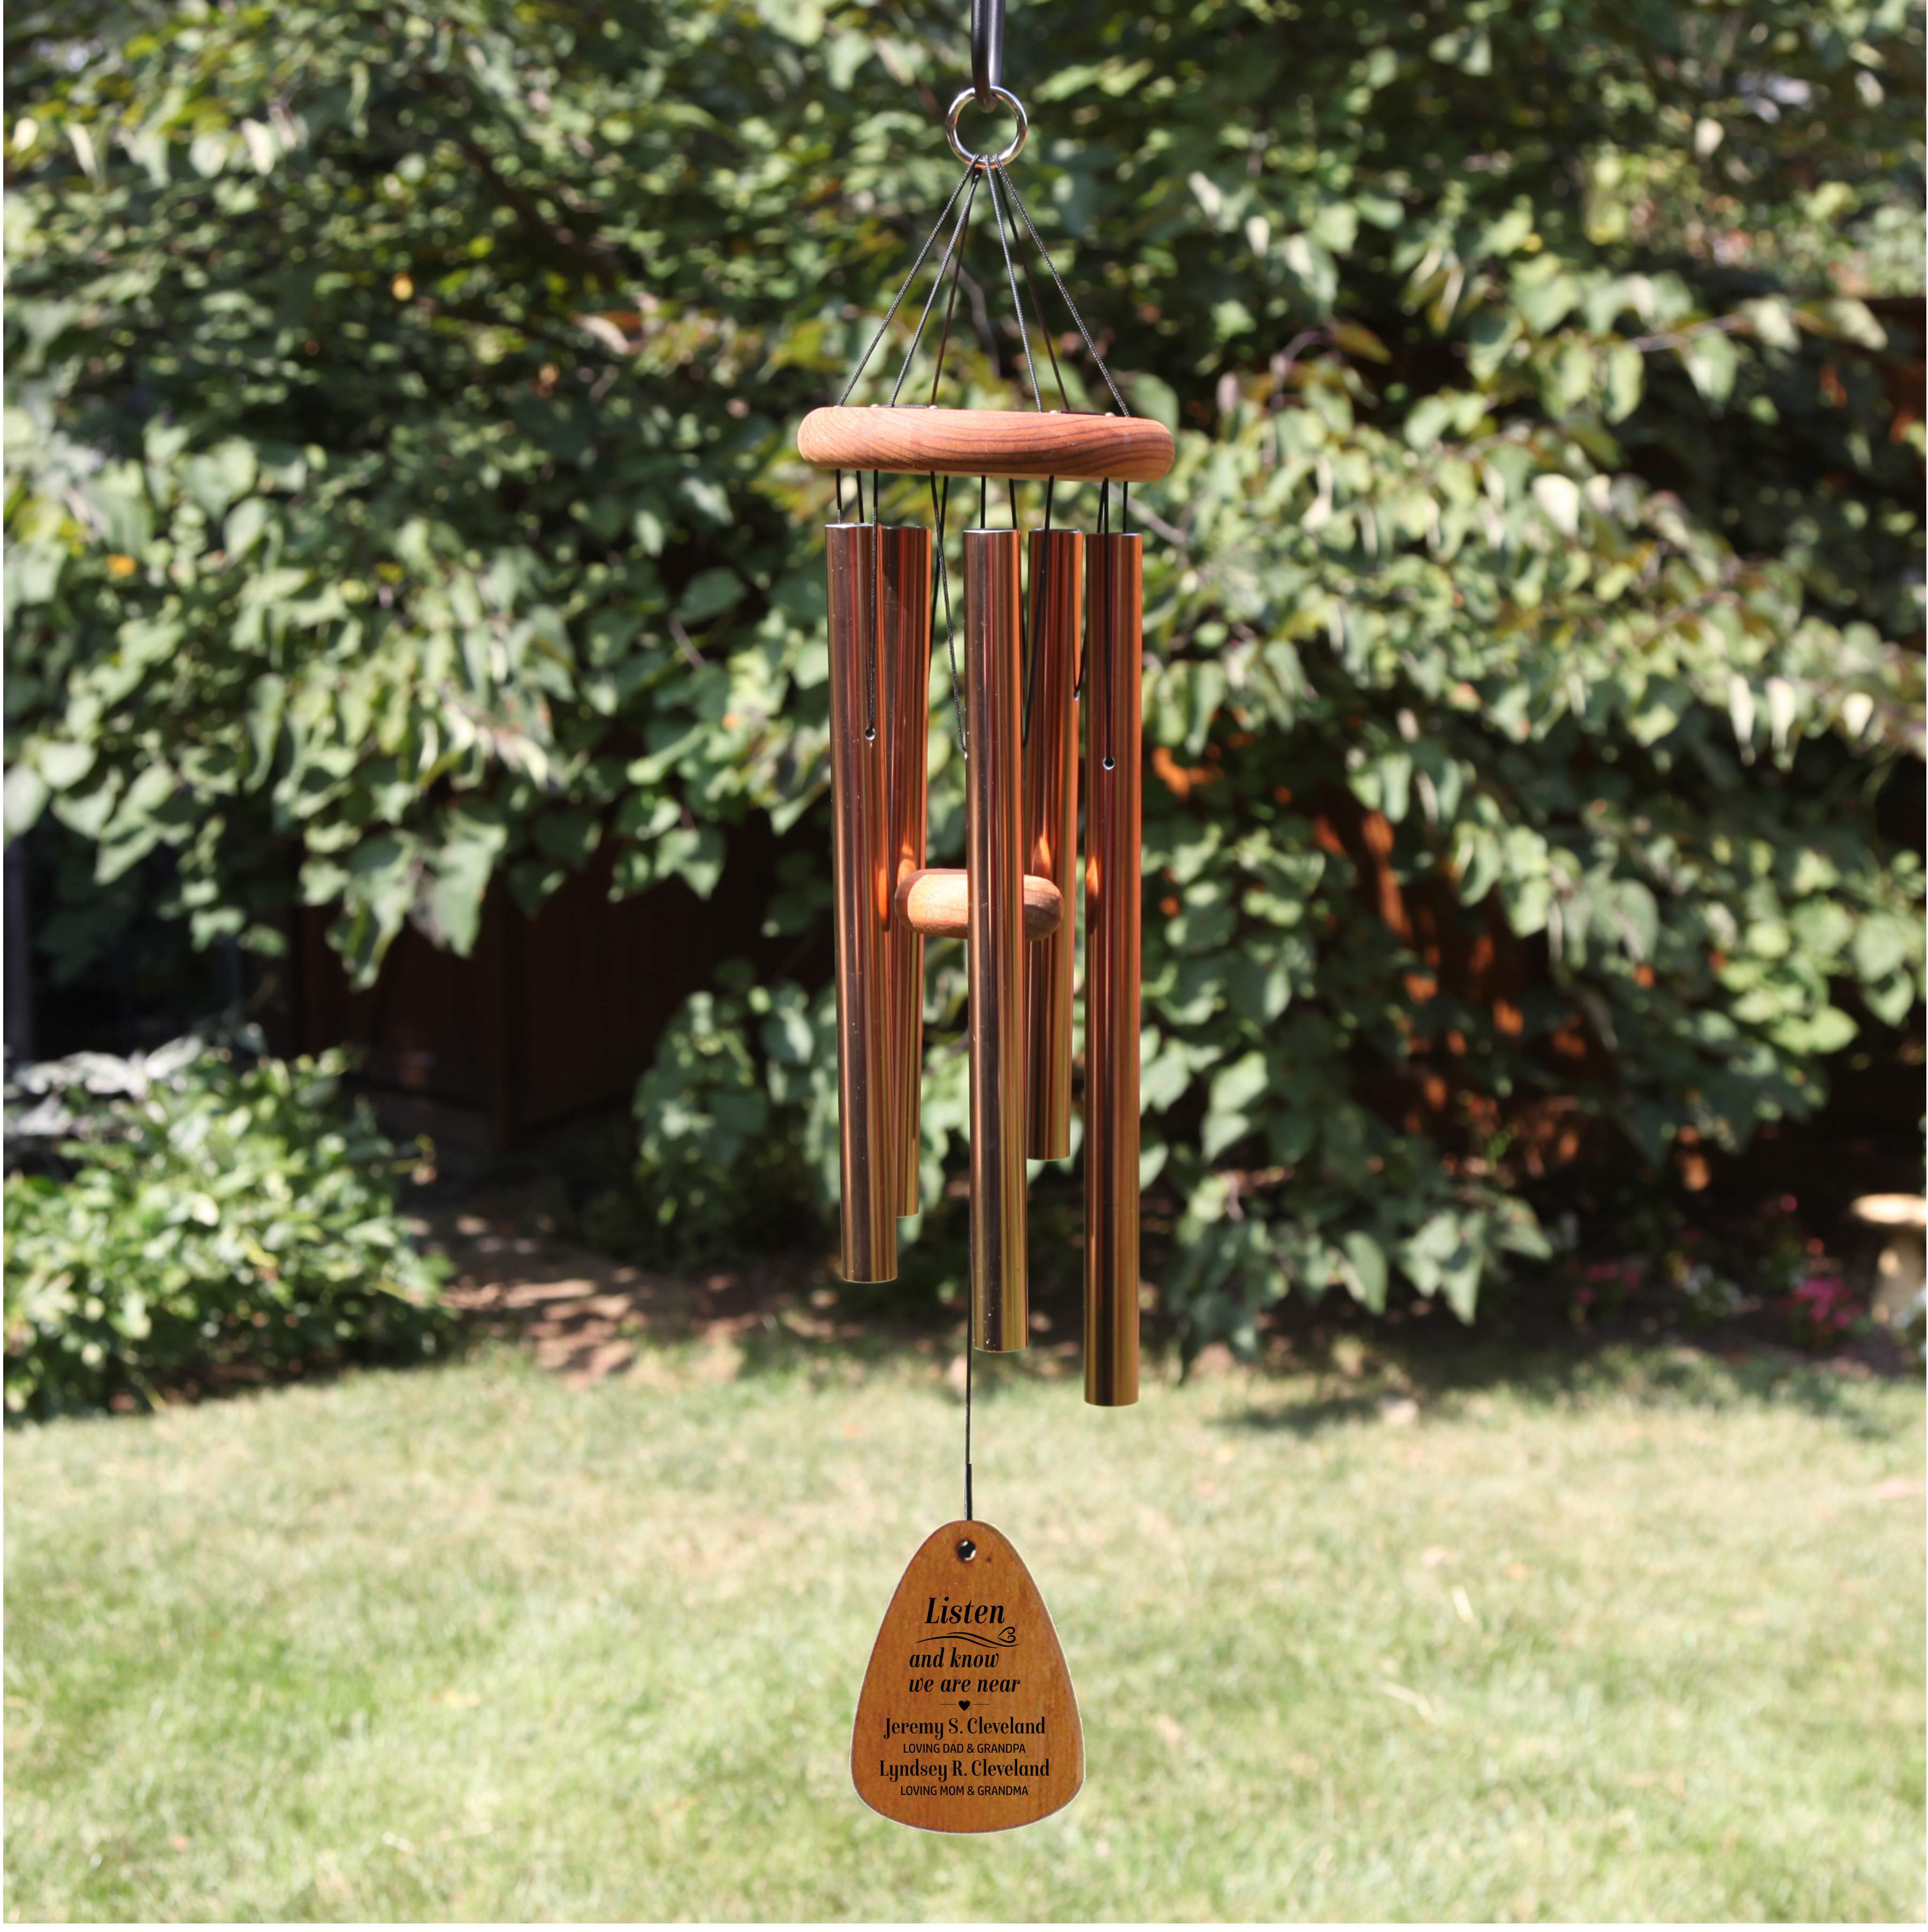 Memorial Gift Idea - We are Near Wind Chime